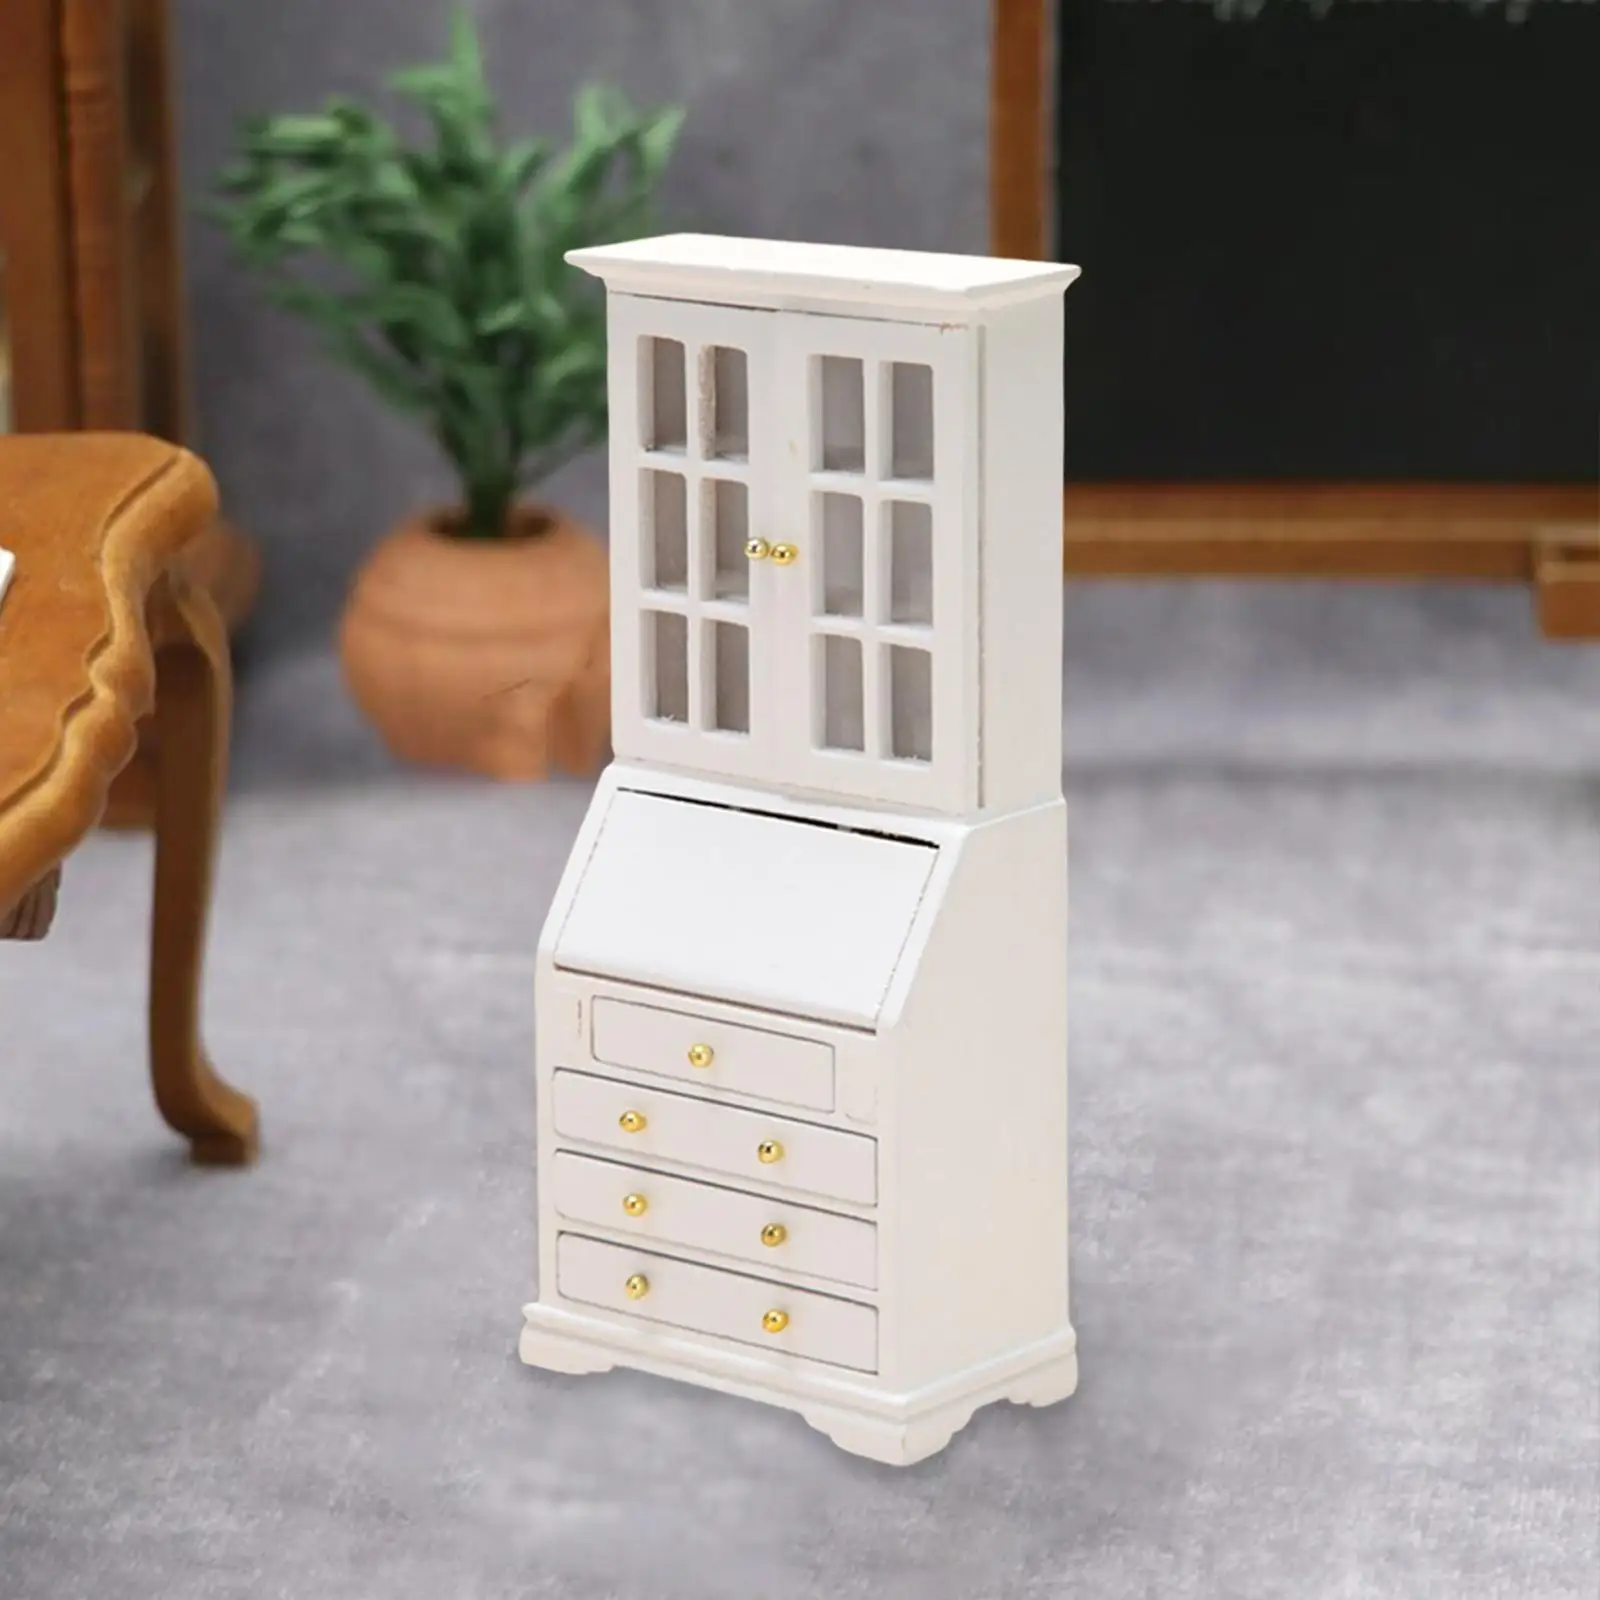 1/12 Dollhouse Bookcase with Drawers Miniature Wood Furniture Professional